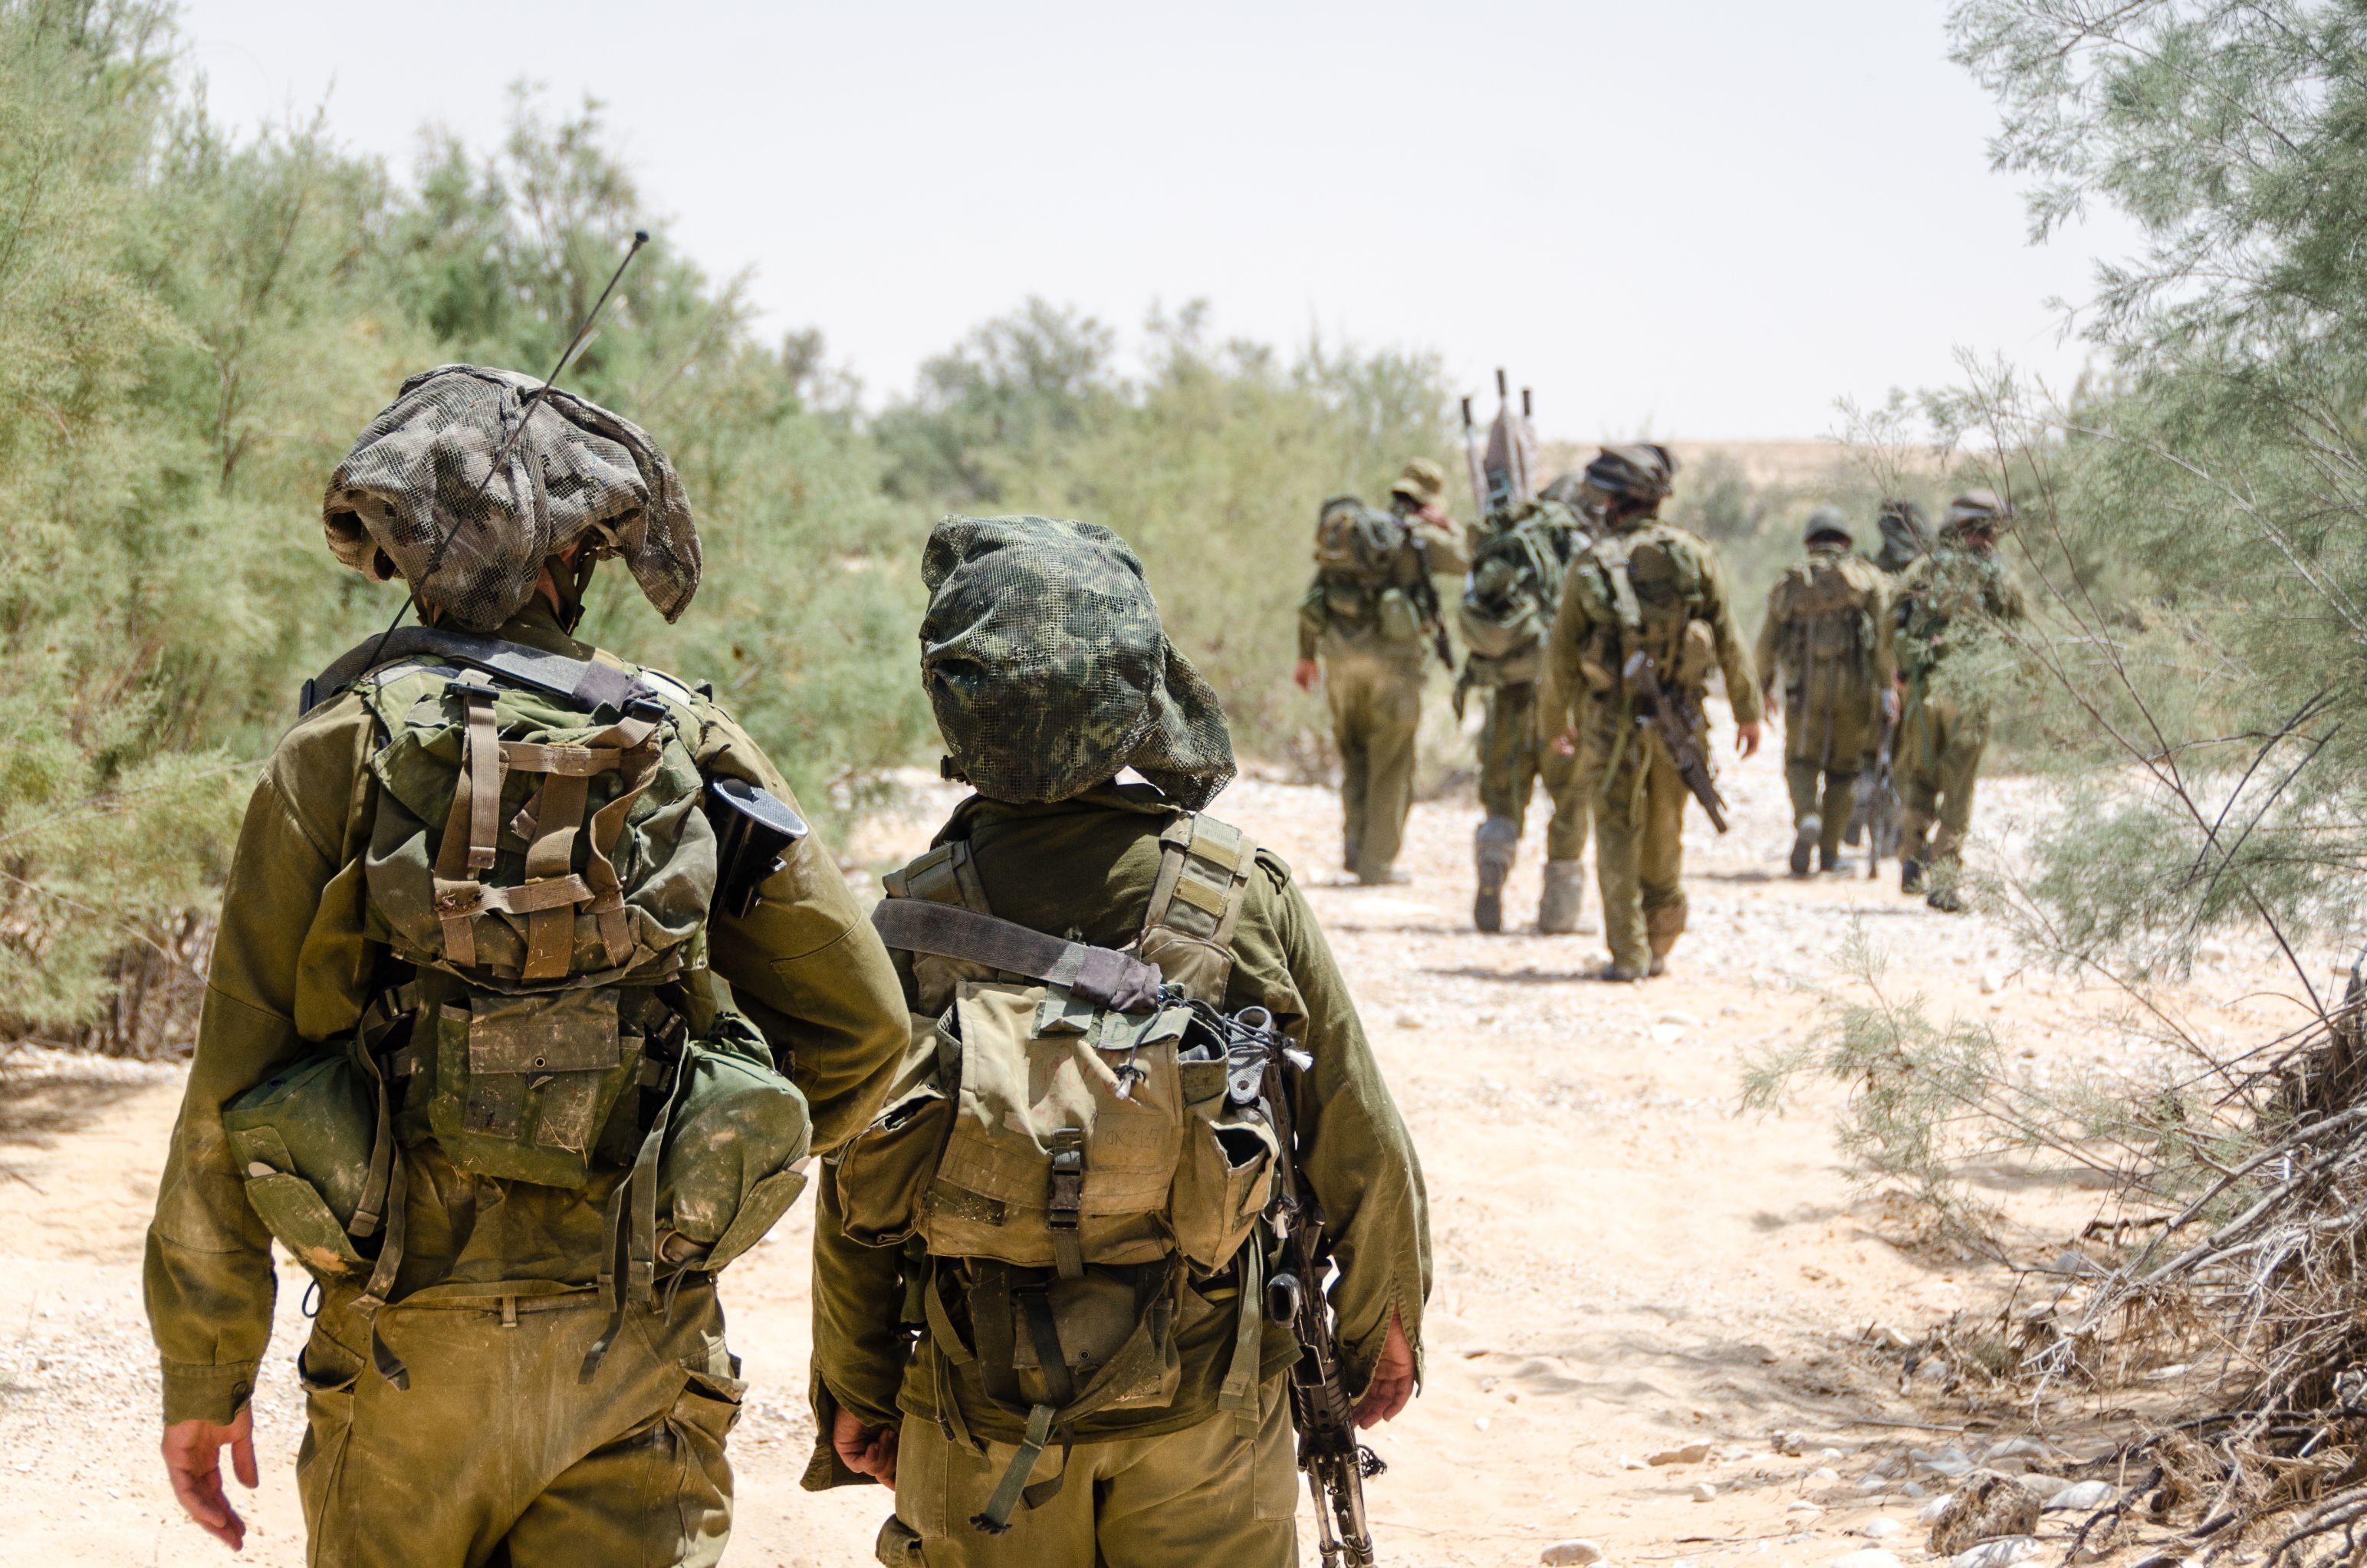 Israeli combat soldiers of an elite counter-terror unit return back to base after a raid in South of Lebanon during the Second Lebanon military campaign / war. Two soldiers in the foreground.